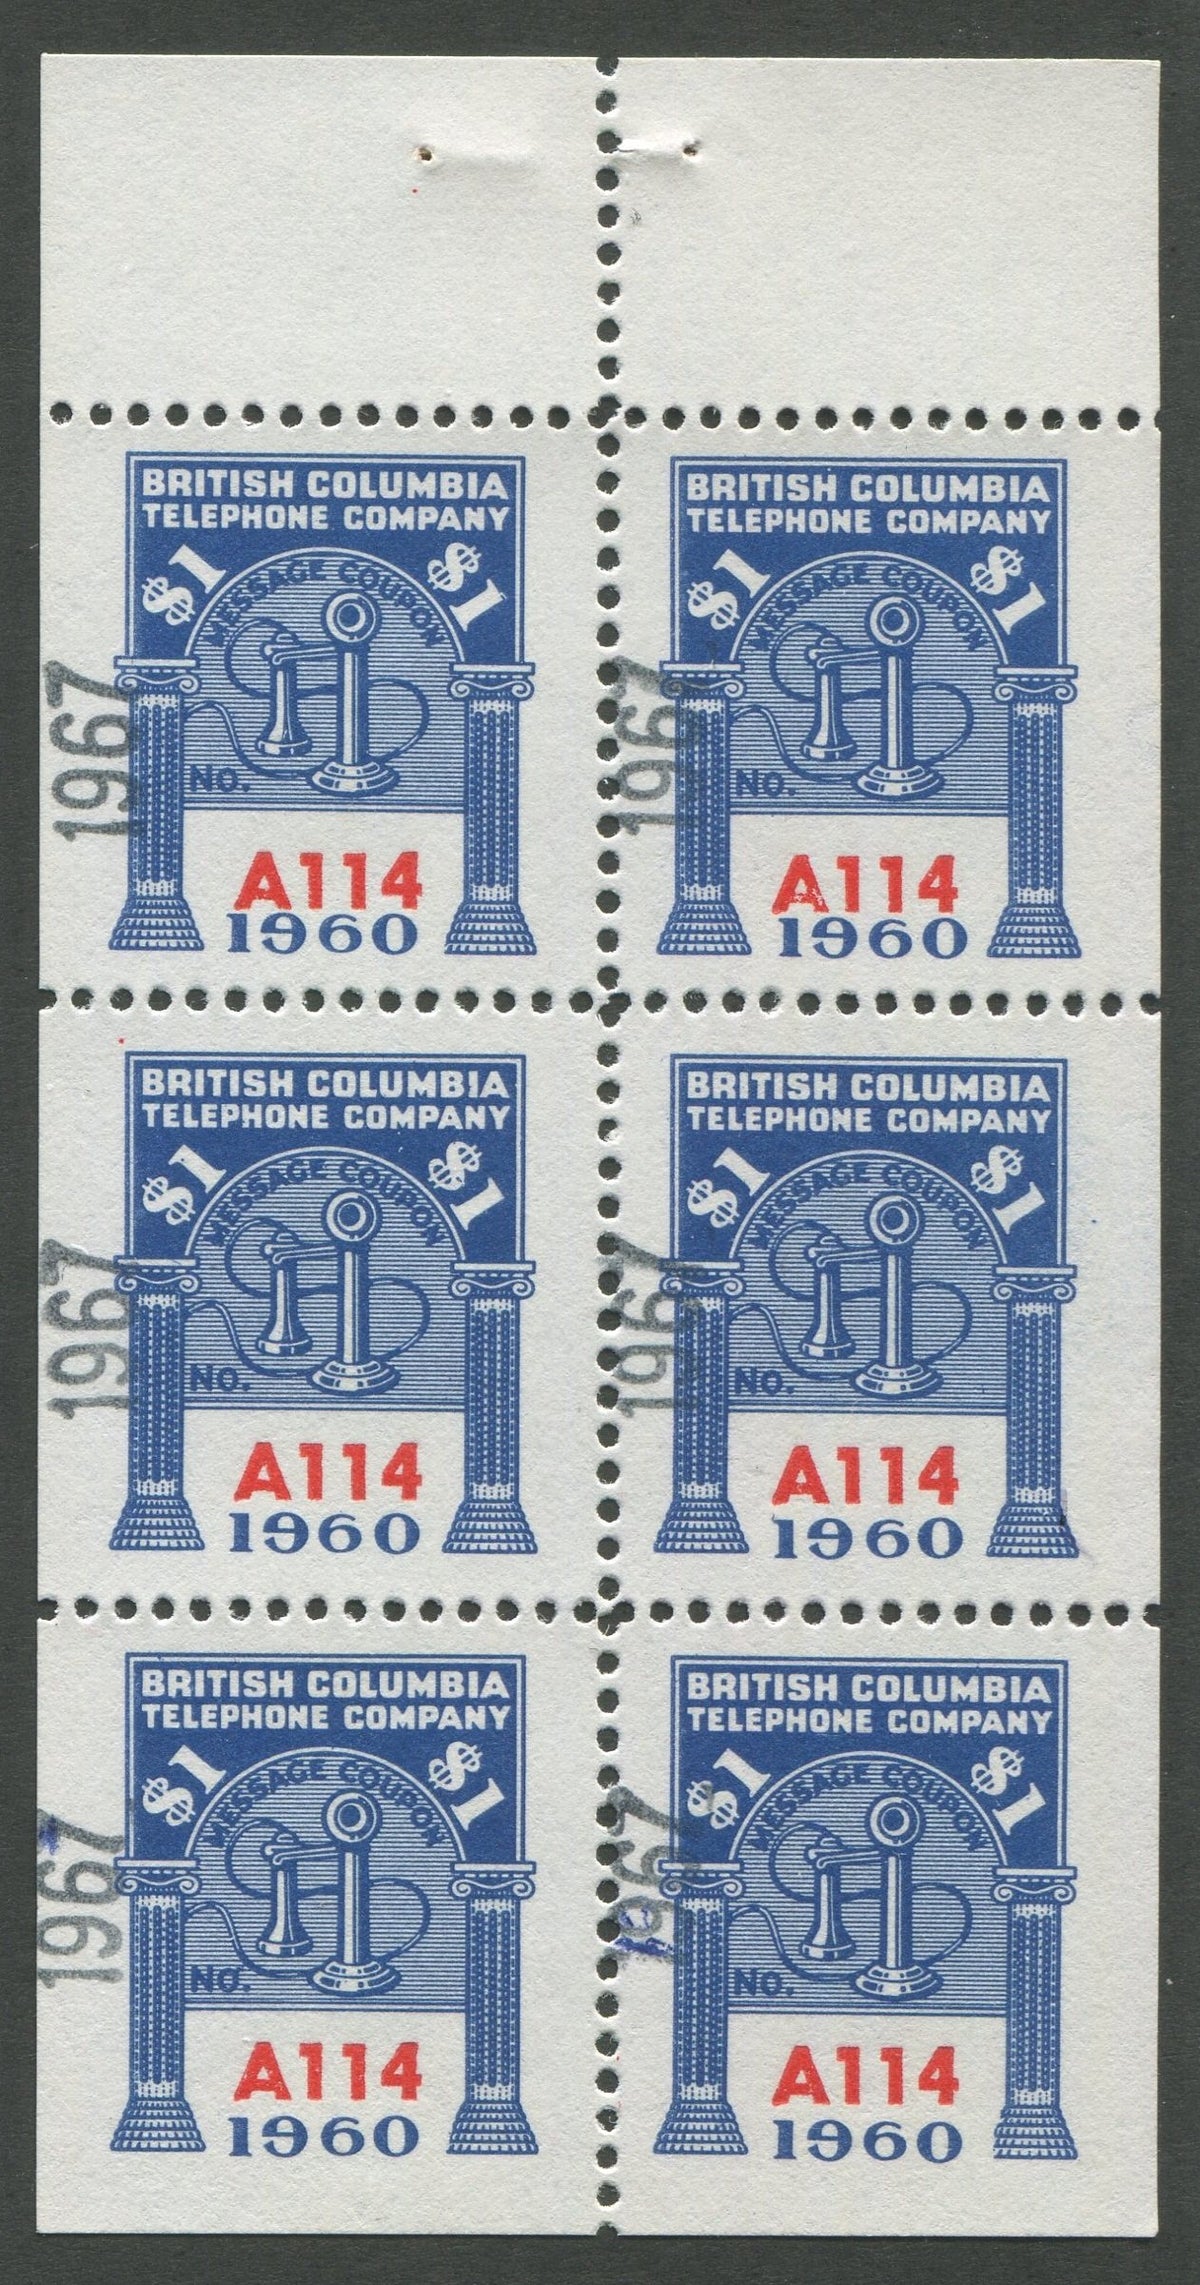 0311BC1708 - BCT213 - Mint Booklet Pane, Watermarked